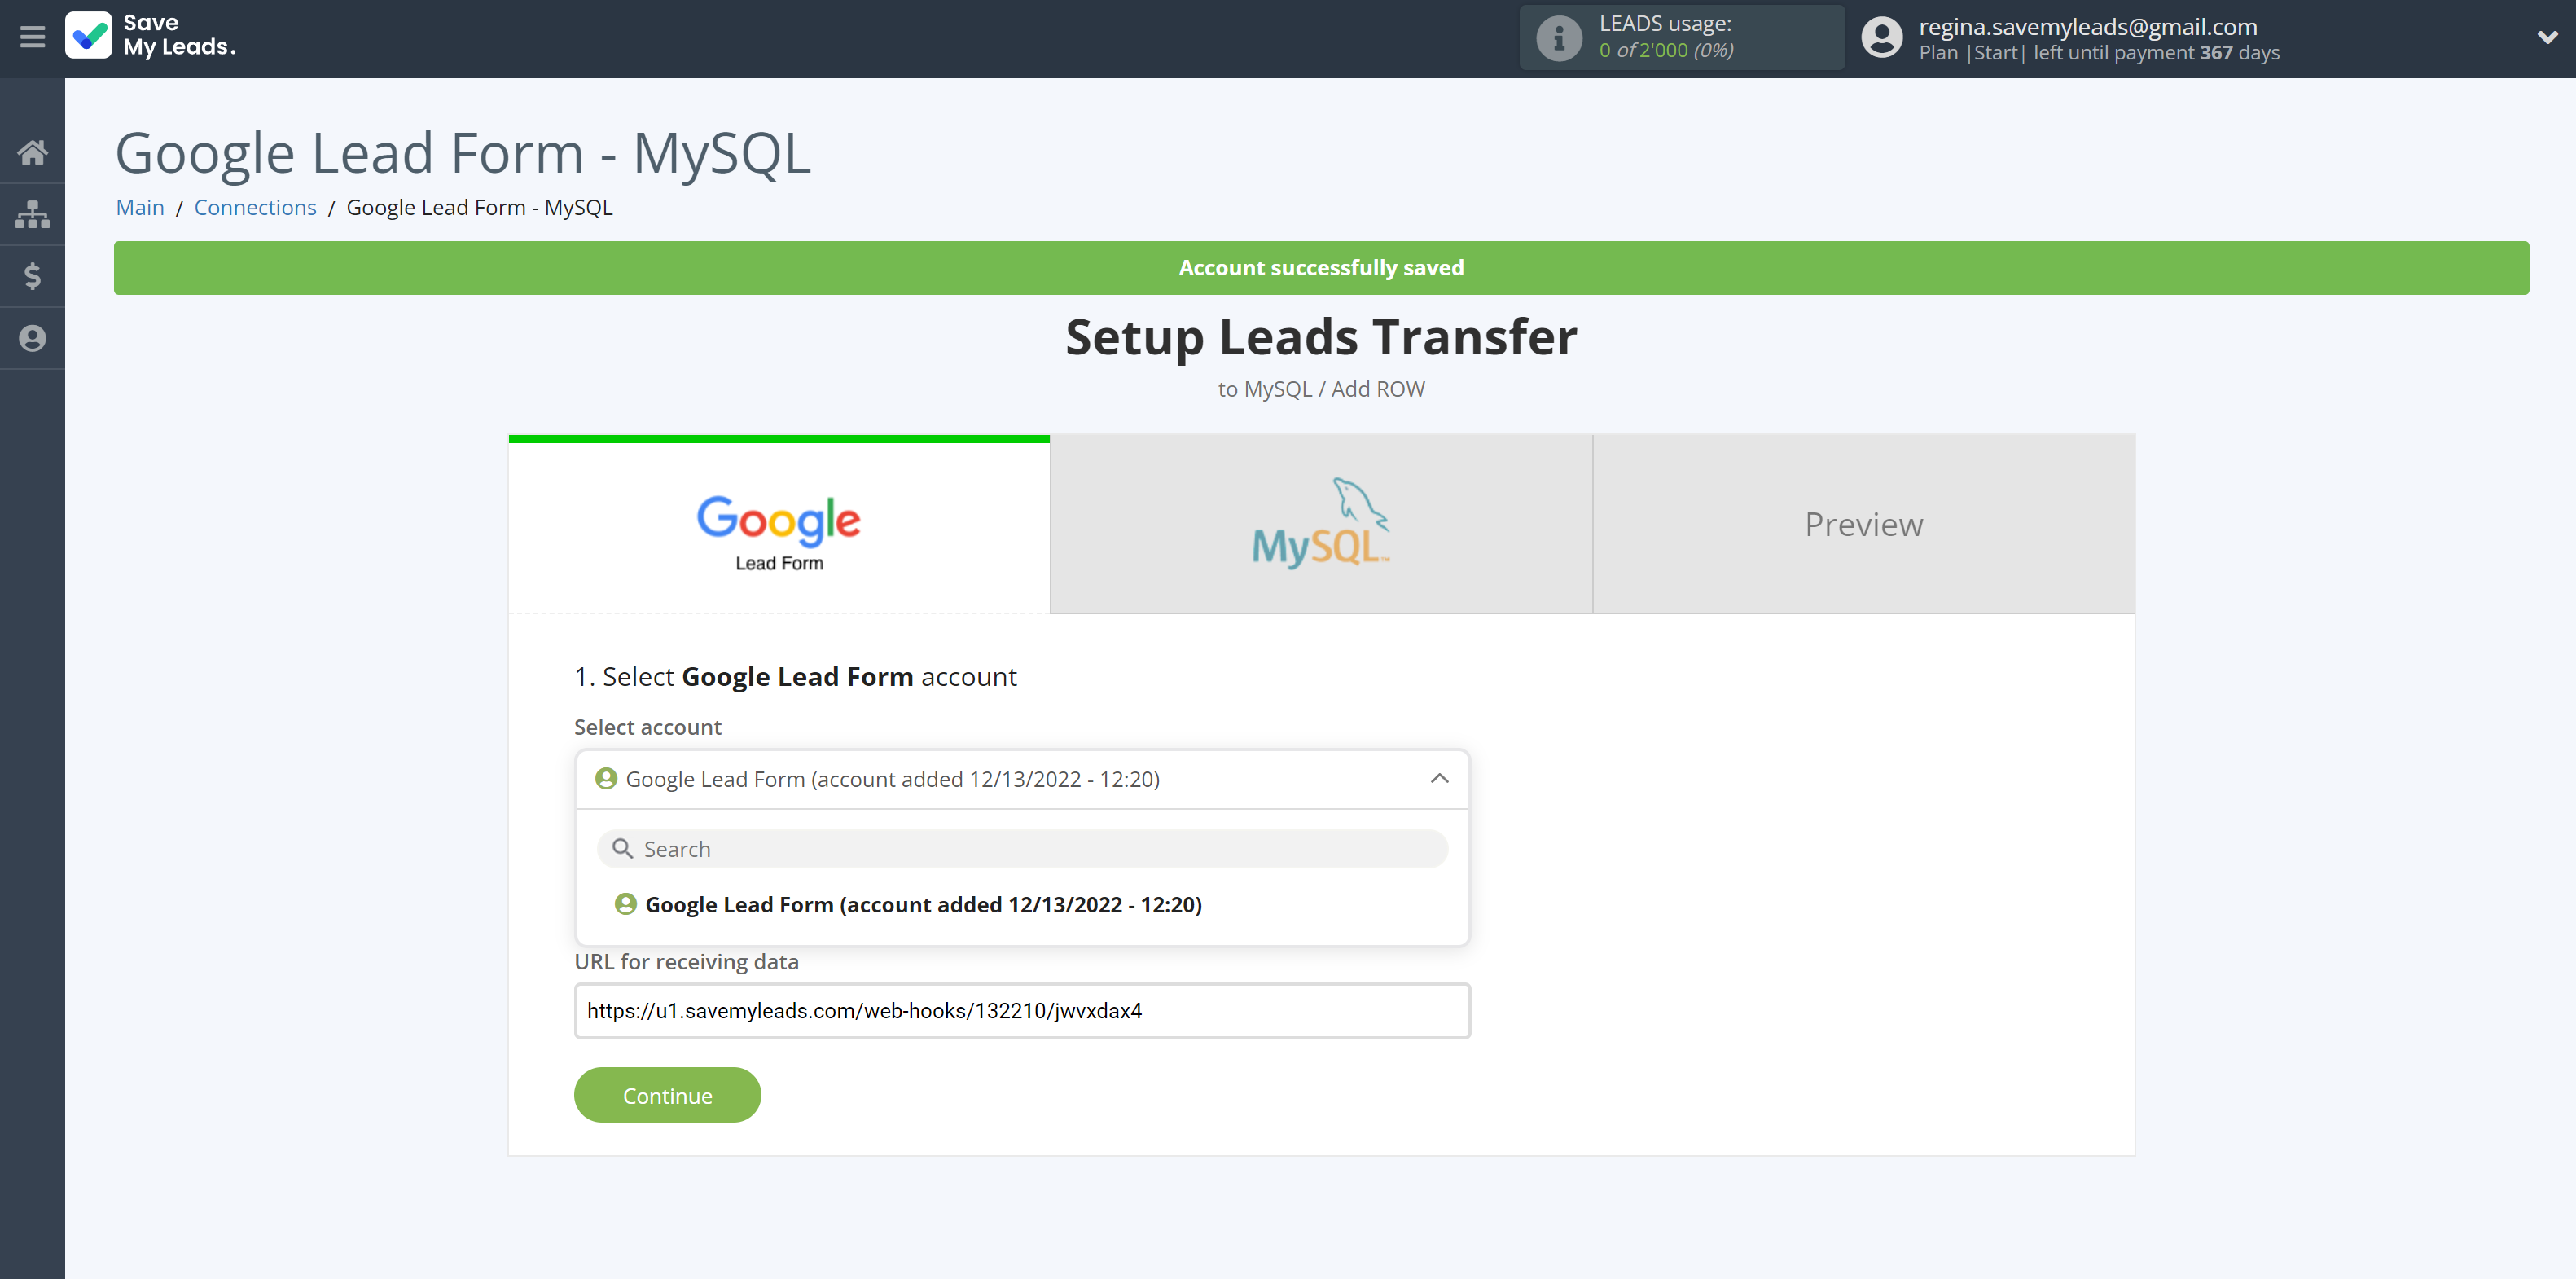 How to Connect Google Lead Form with MySQL | Data Source account selection